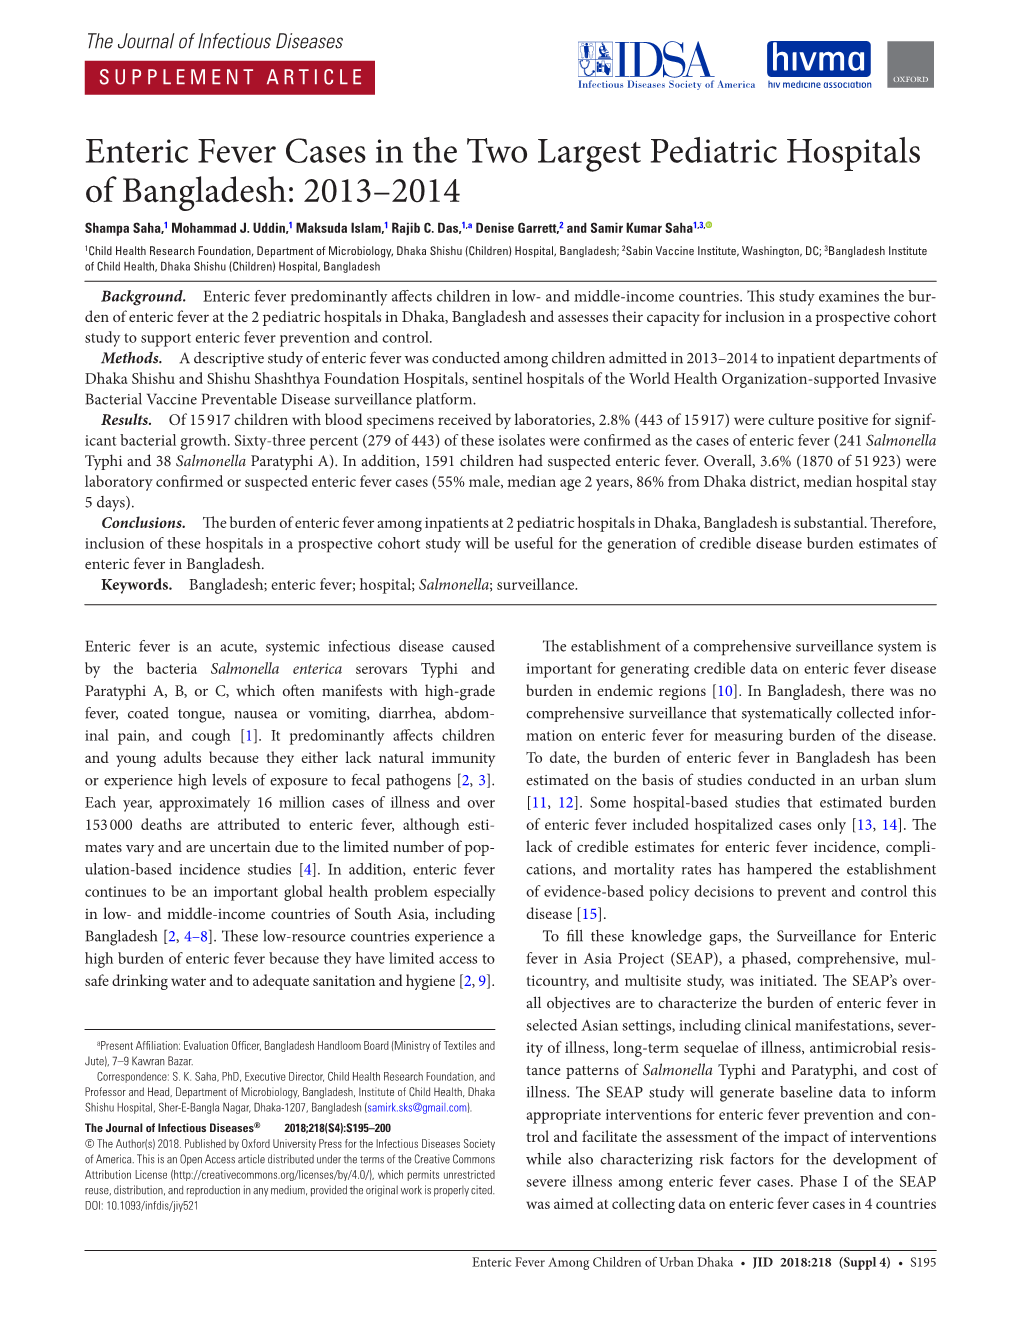 Enteric Fever Cases in the Two Largest Pediatric Hospitals of Bangladesh: 2013–2014 Shampa Saha,1 Mohammad J